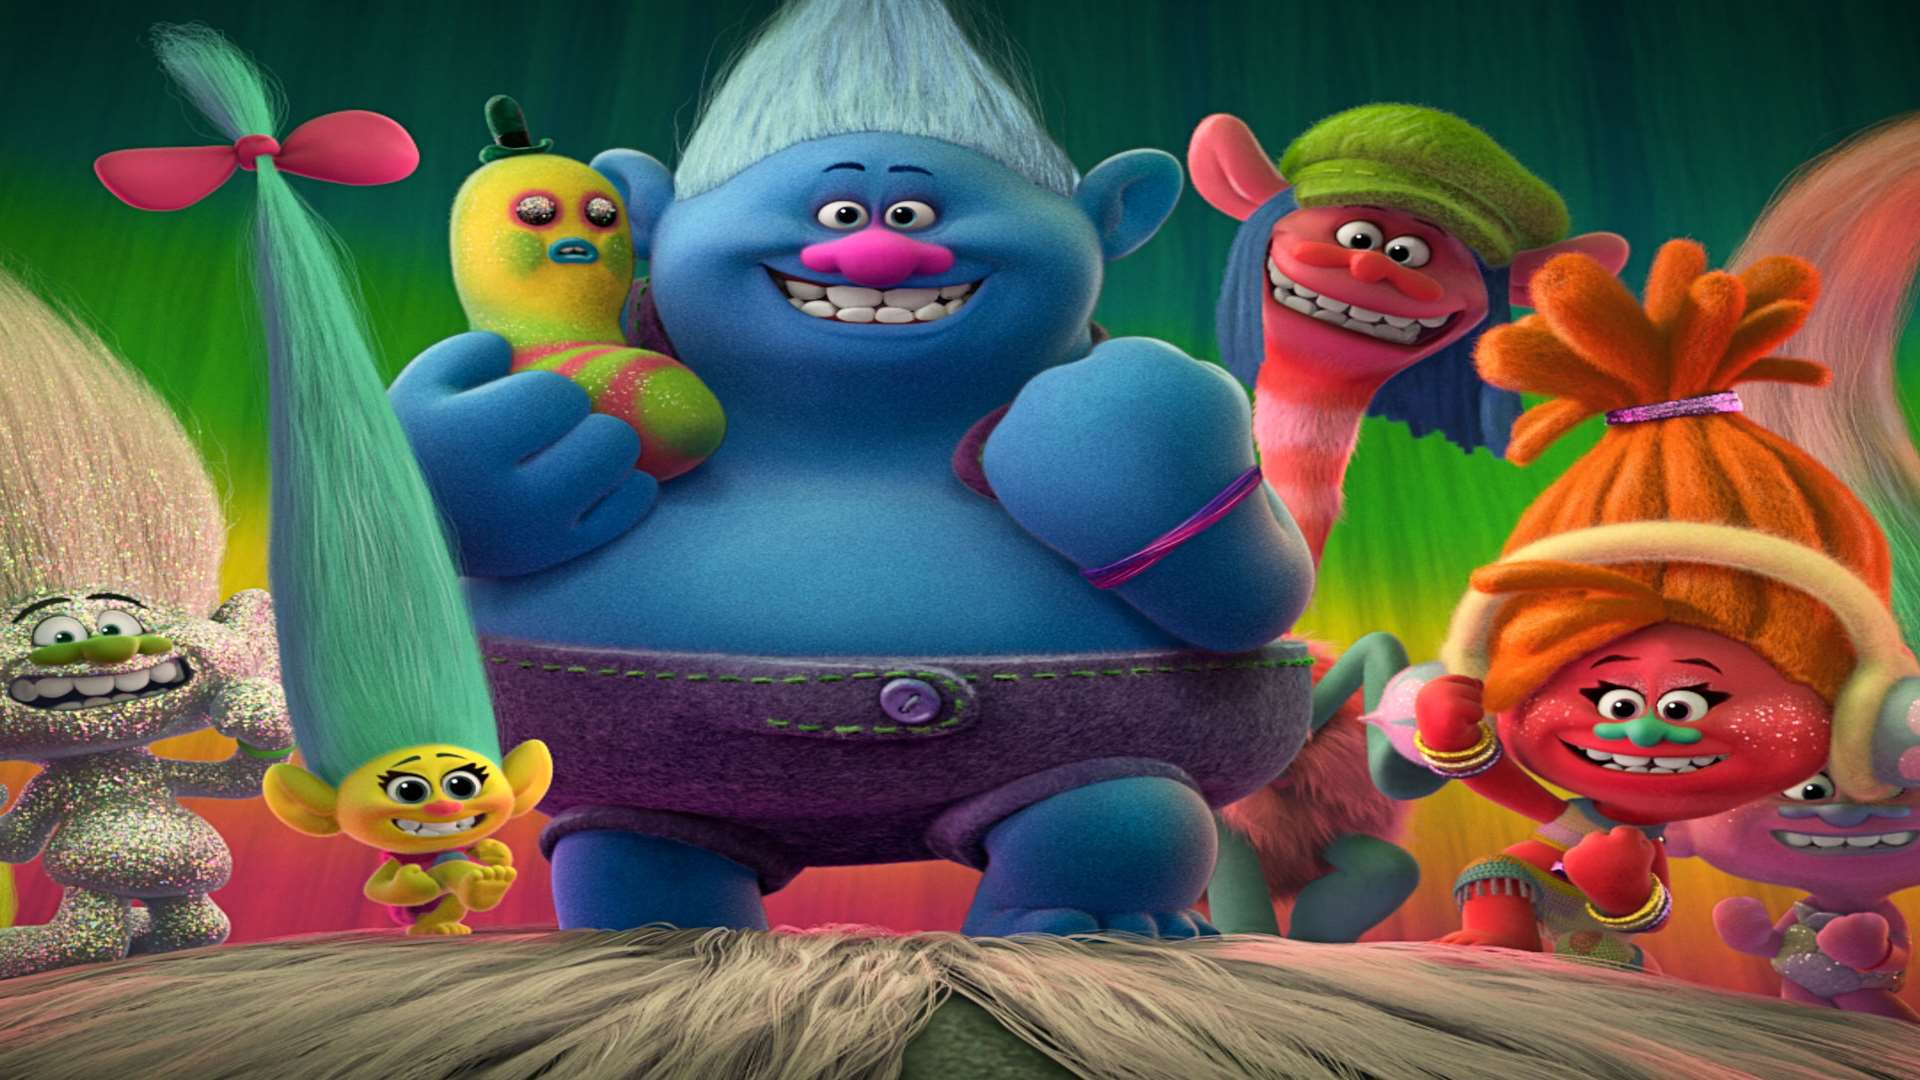 Trolls is 92 minutes of glitter-dusted, computer-animated joy that is virtually impossible to resist